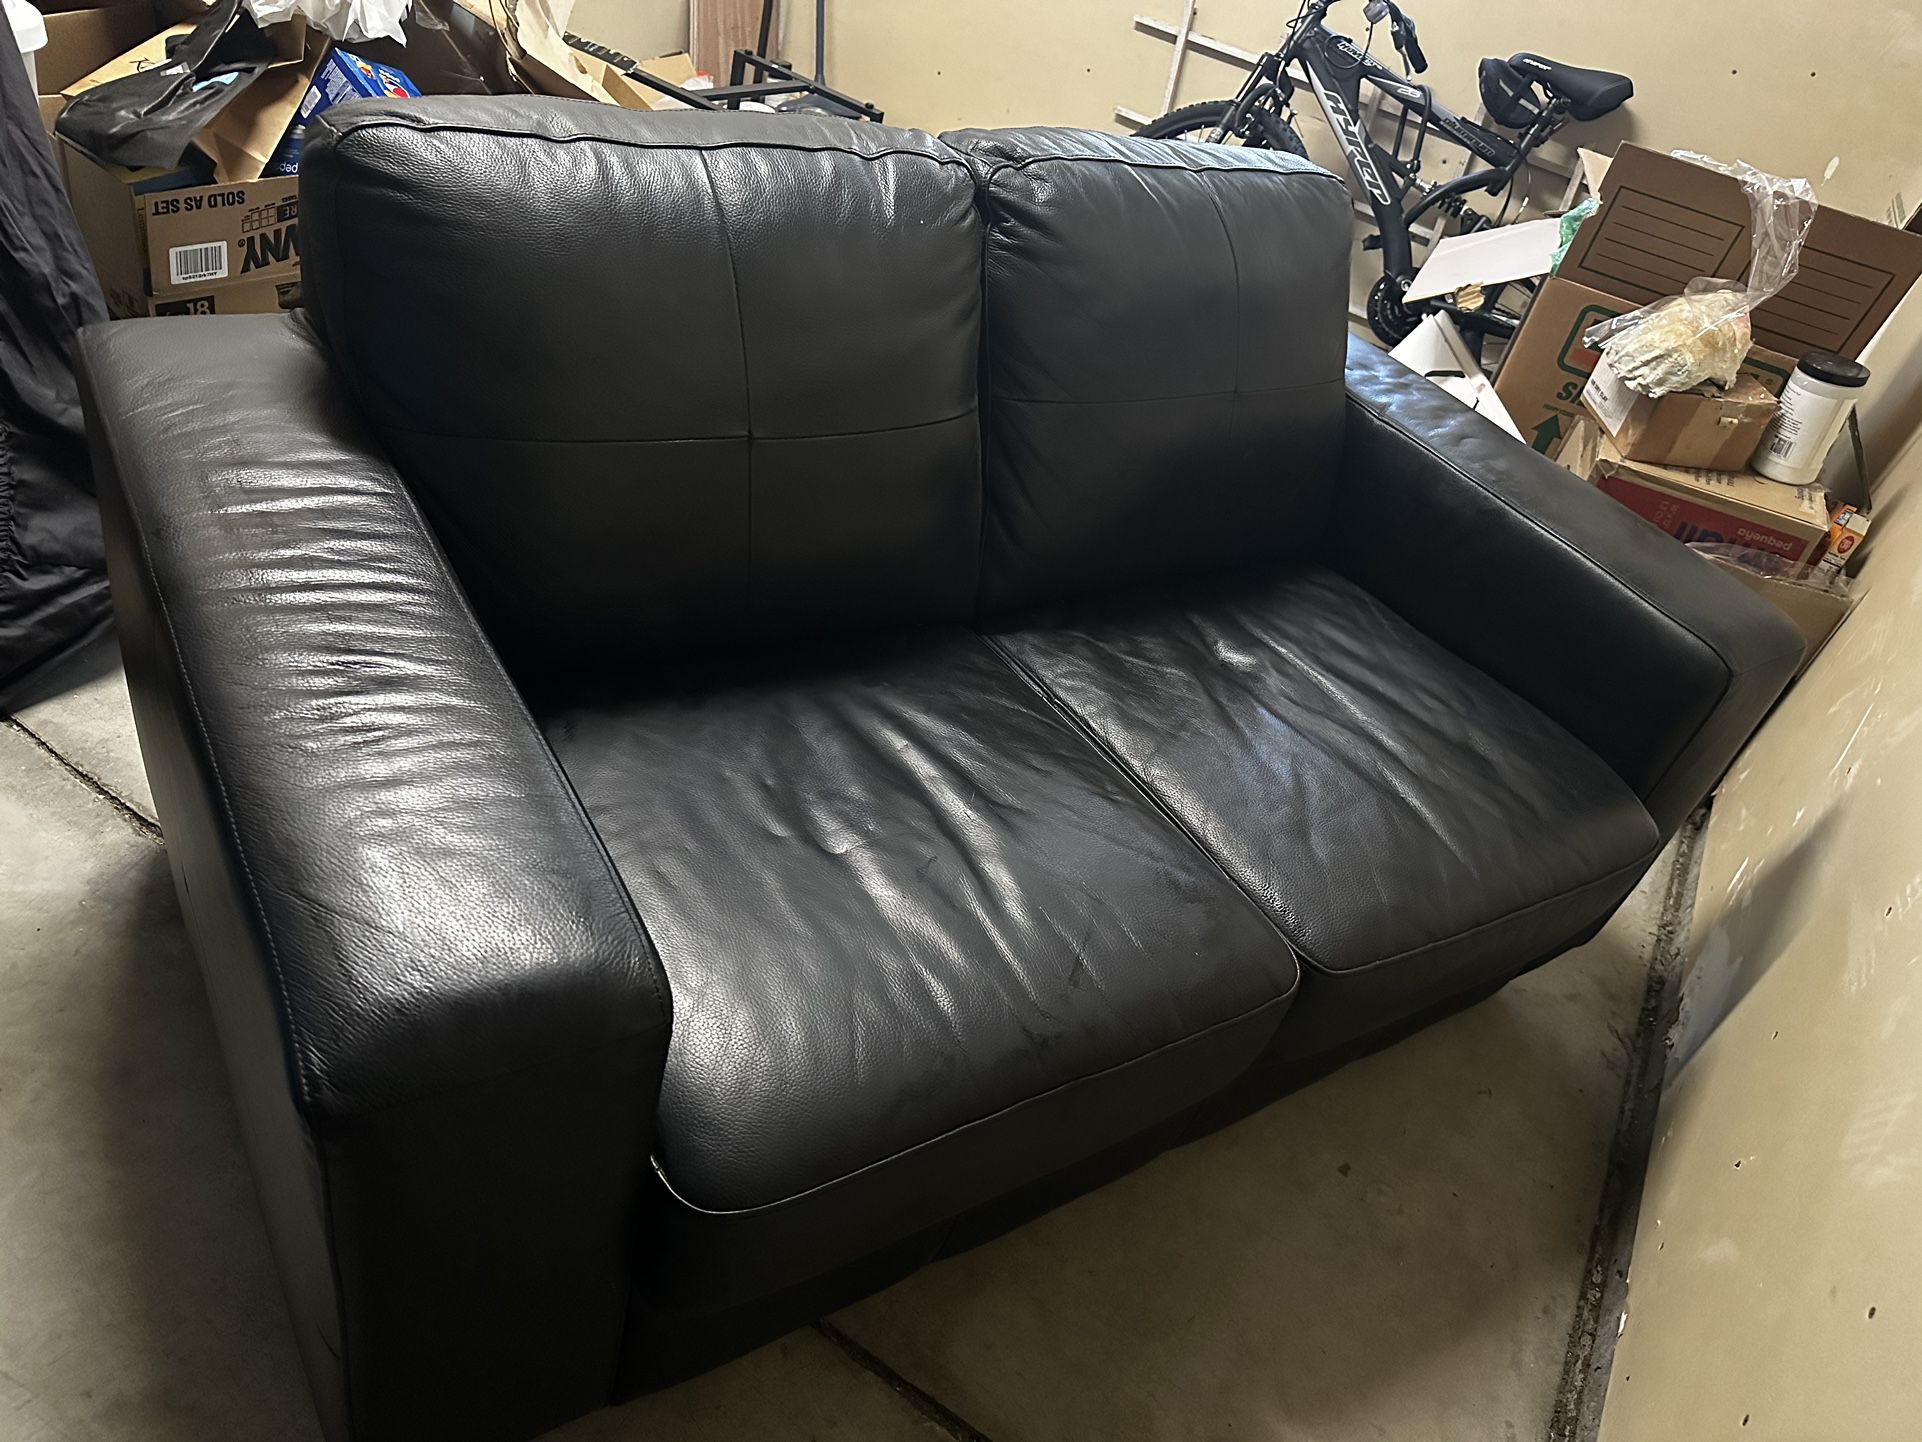 Ikea Leather Couch (Move Out Sale, Needs to Asap)